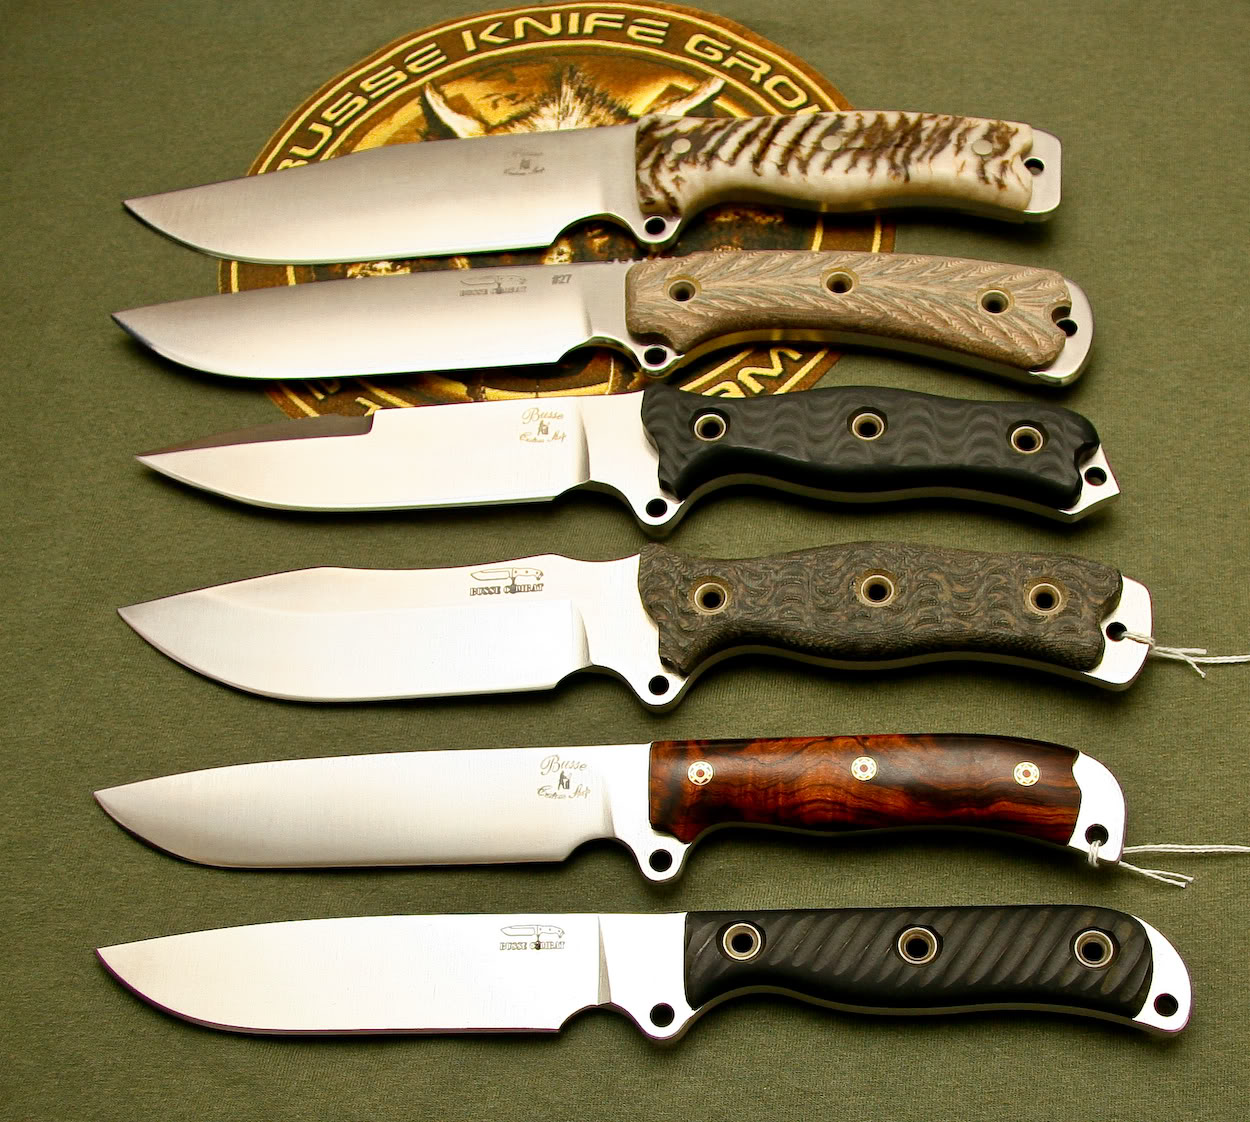 seven knives are laying in a row on a table